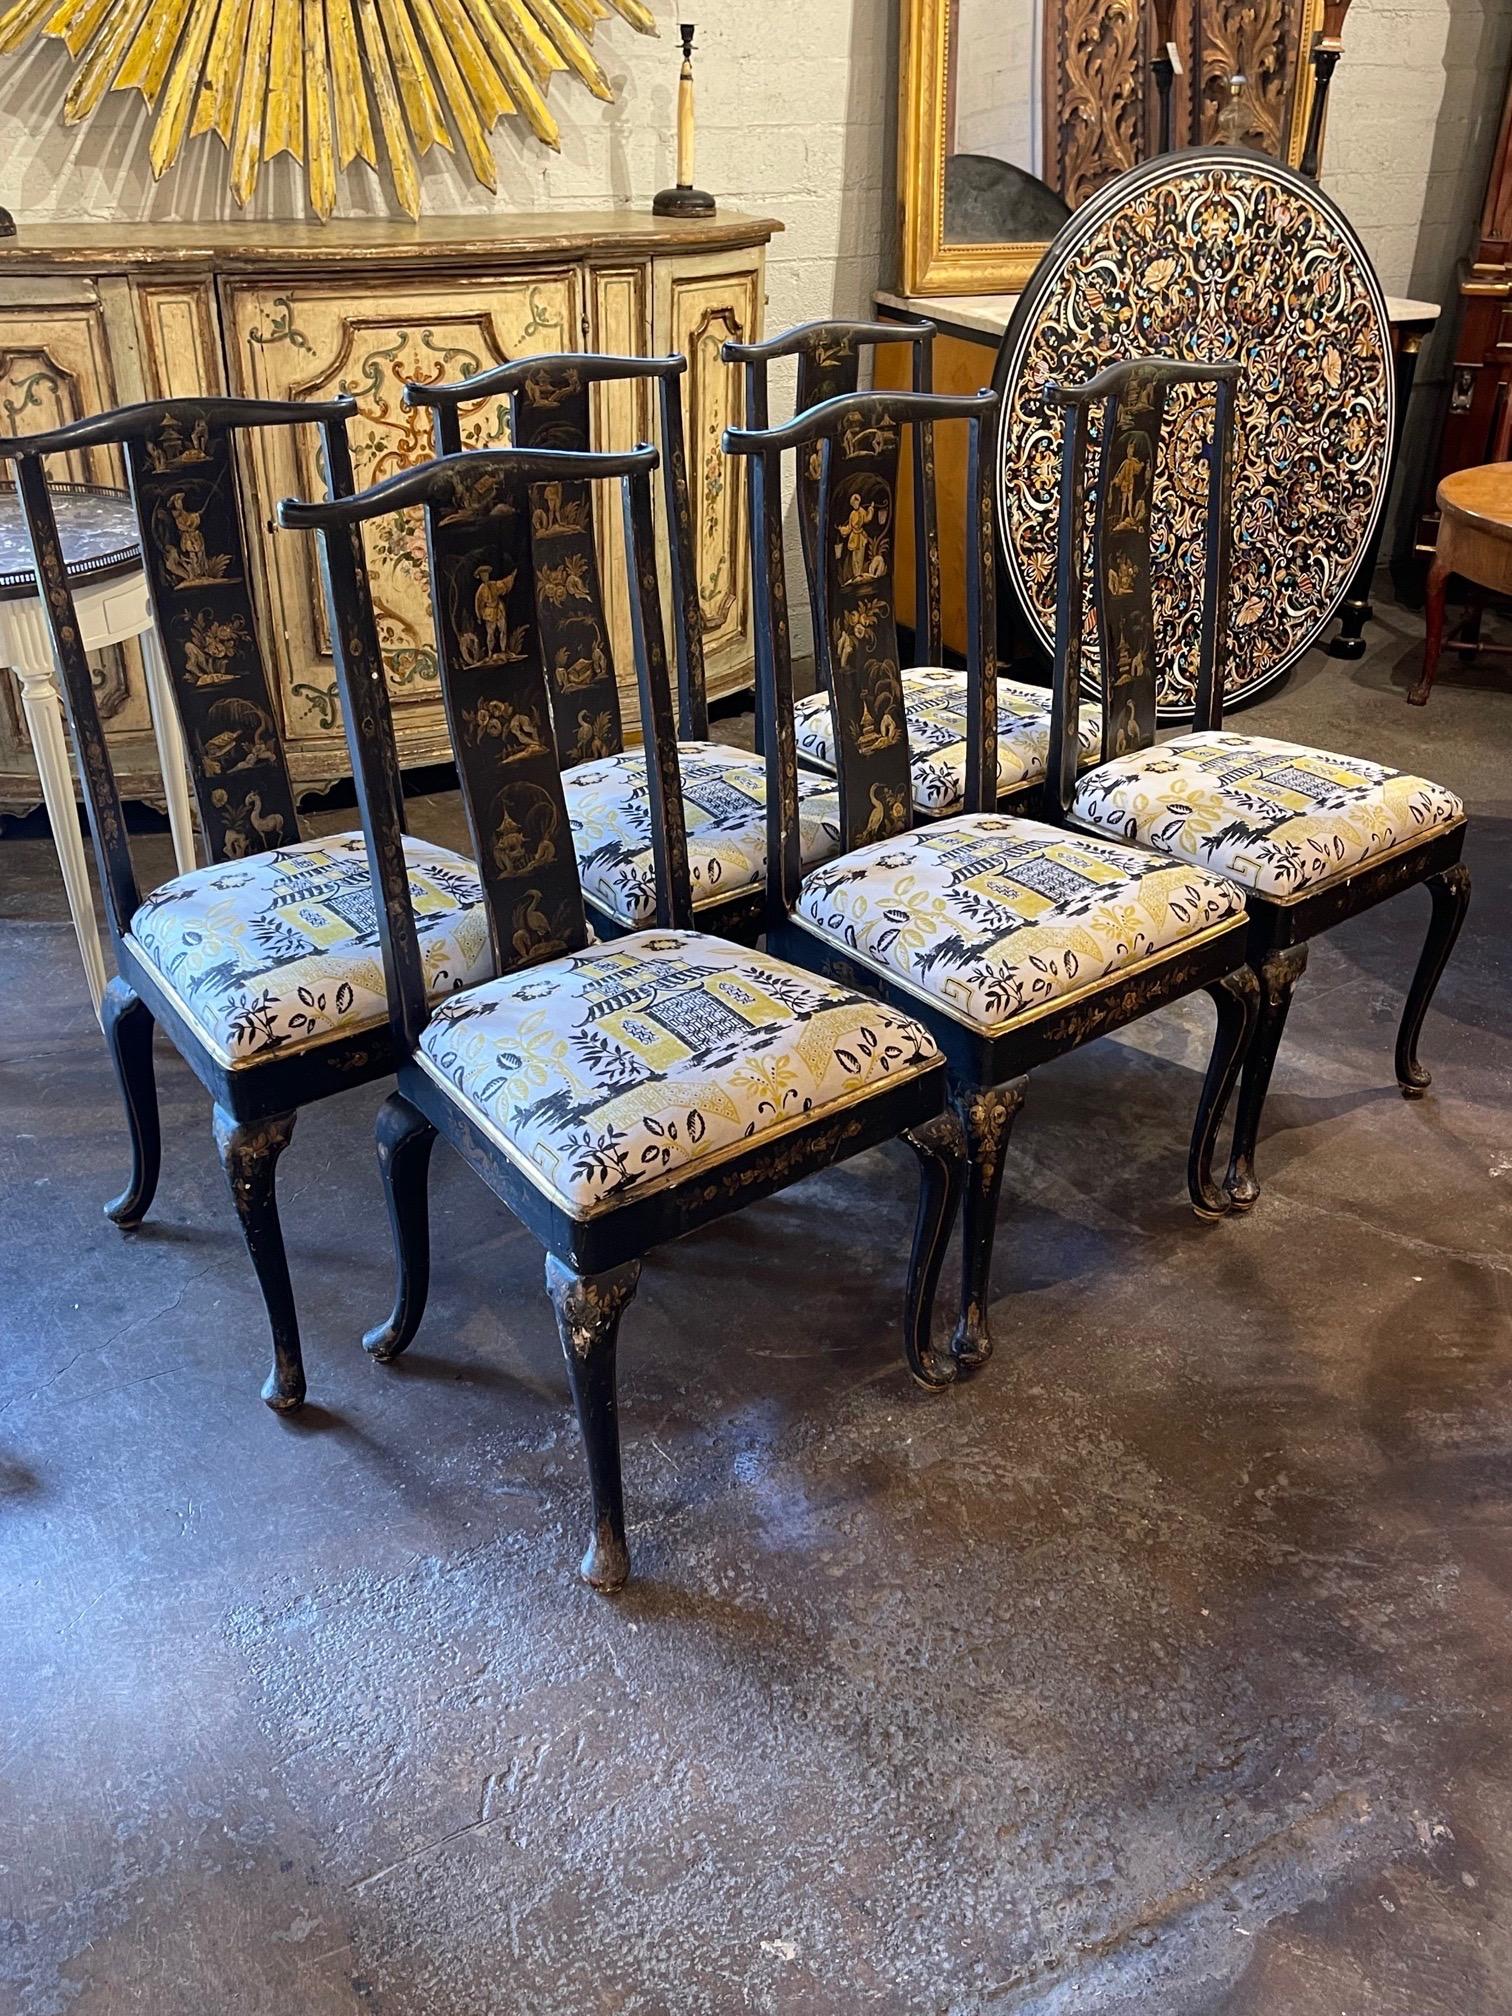 Decorative set of English 19th century Chinoiserie side chairs. Beautiful hand painted images on the chairs as well as an upholstered seats. Very fine artistry on these. So pretty!!